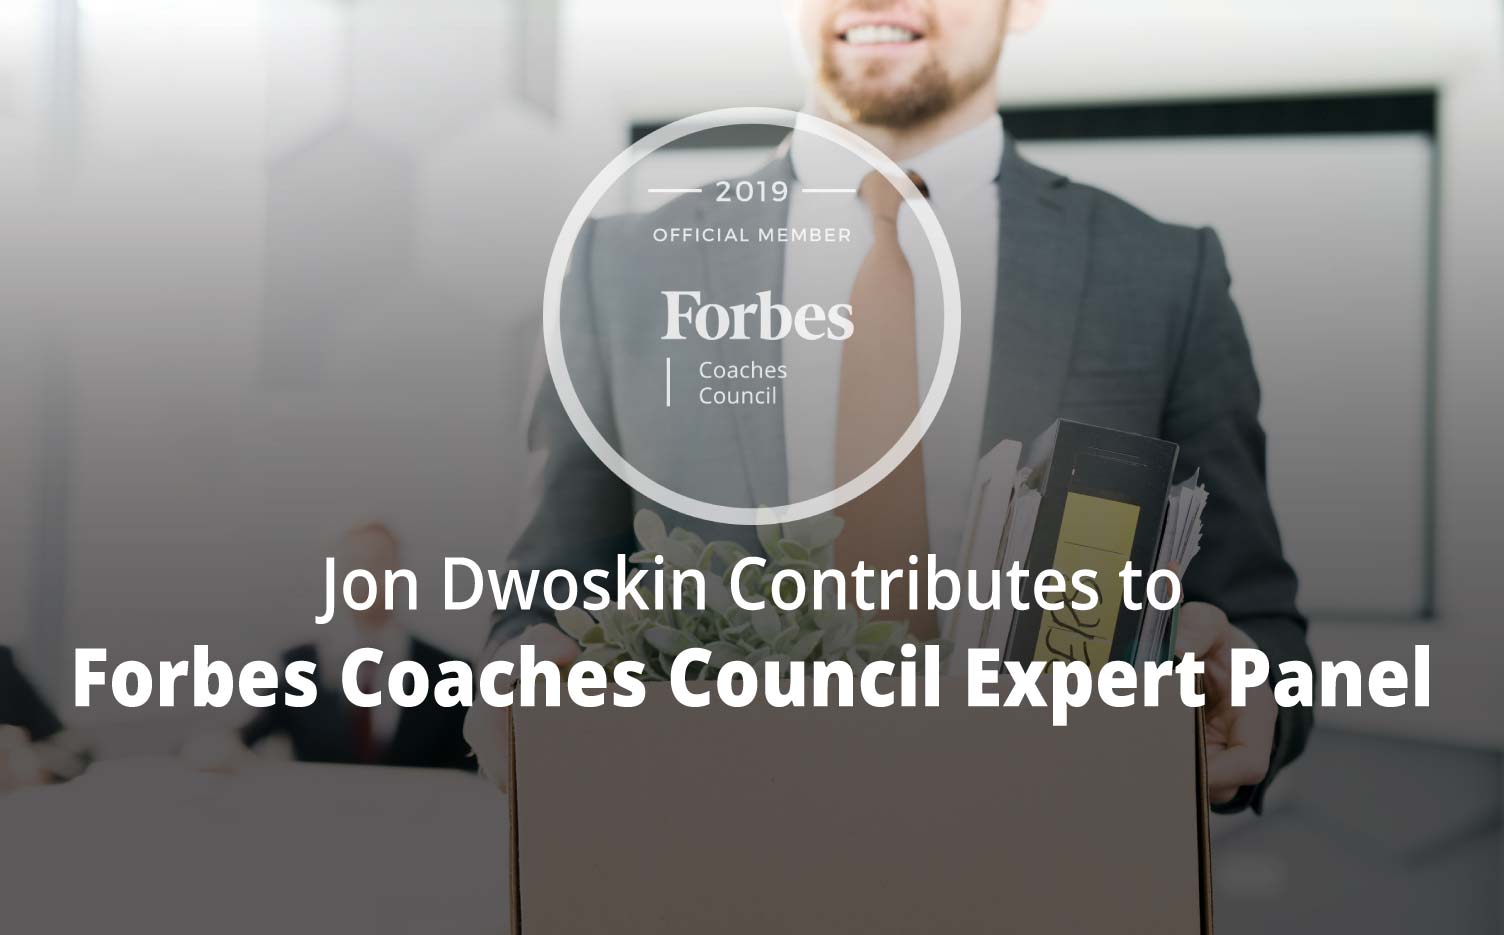 Jon Contributes to Forbes Coaches Council Expert Panel: 13 Signs You Might Be The Reason Your Employees Are Quitting